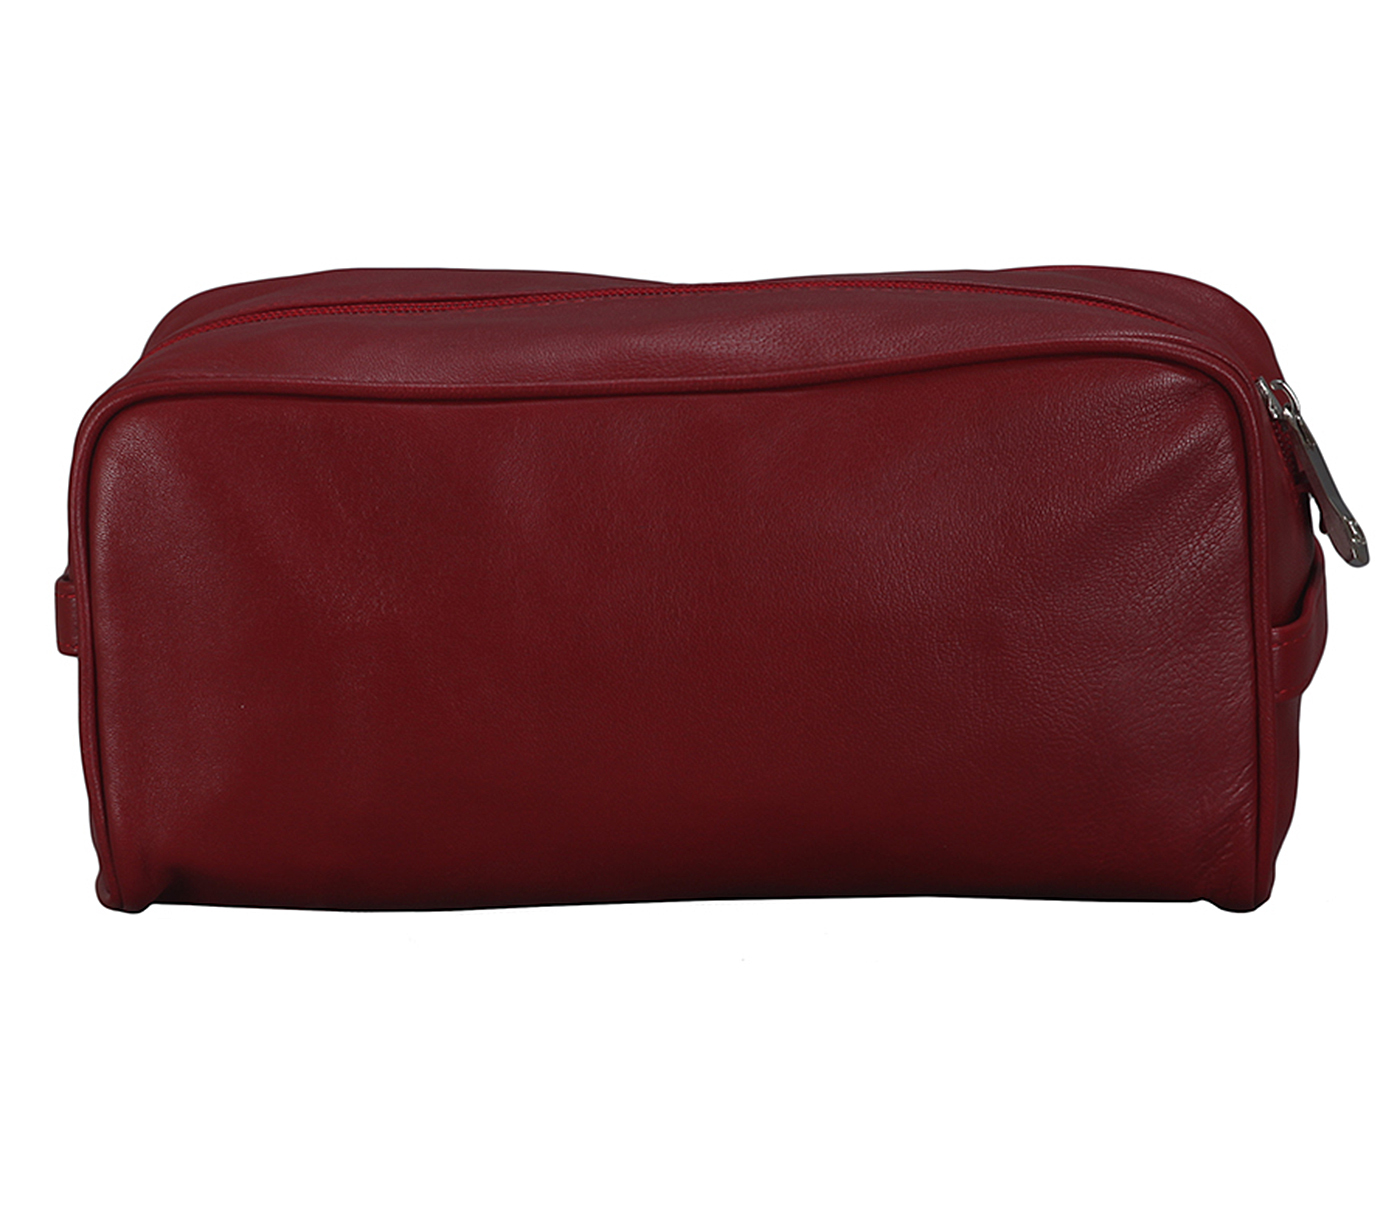 SC1--Unisex Wash & Toiletry travel Bag in Genuine Leather - Red